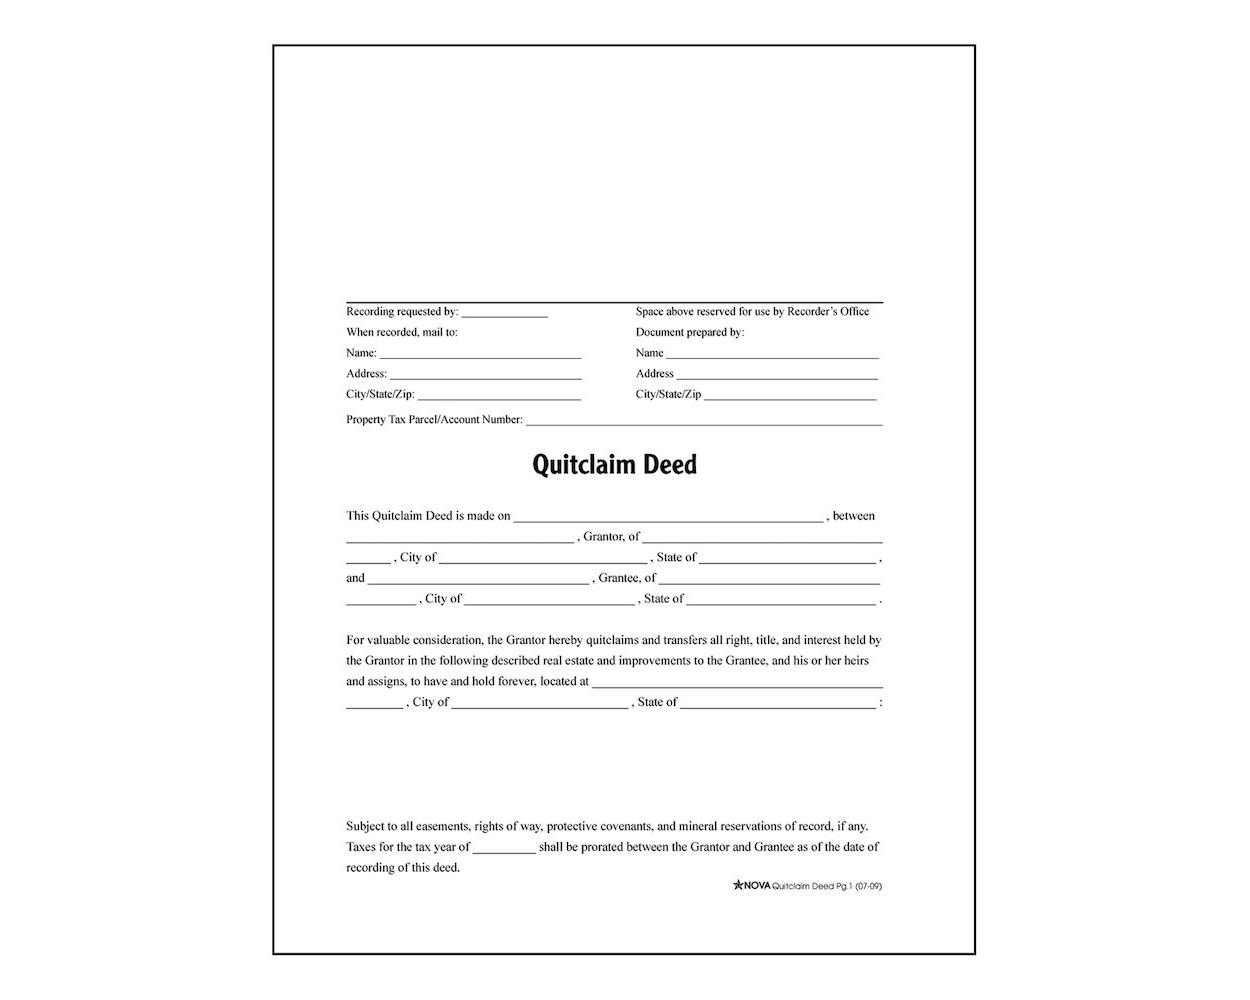 Adams Quitclaim Deed Forms And Instructions